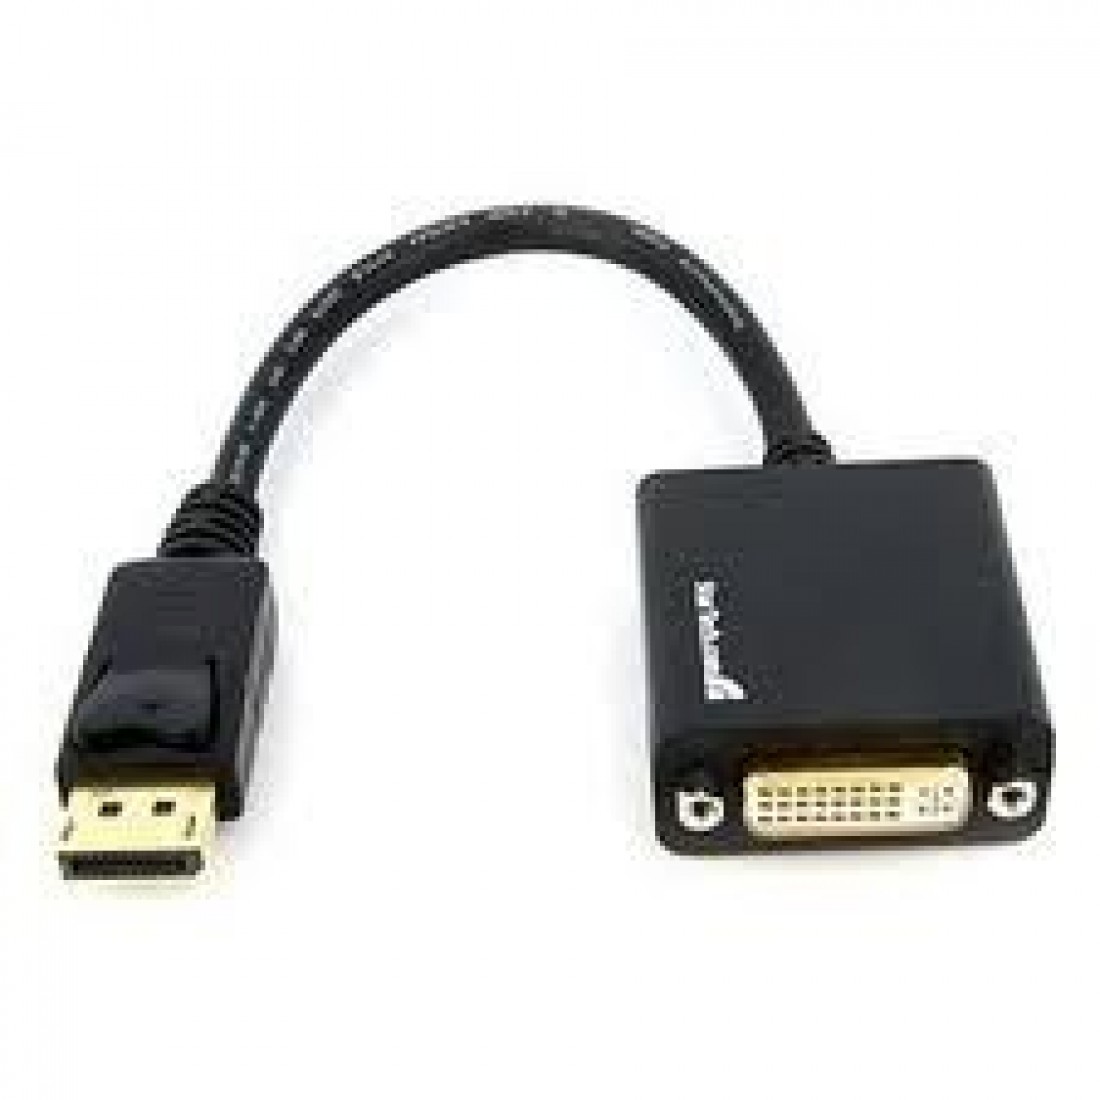 DP MALE TO DVI FEMALE ADAPTER